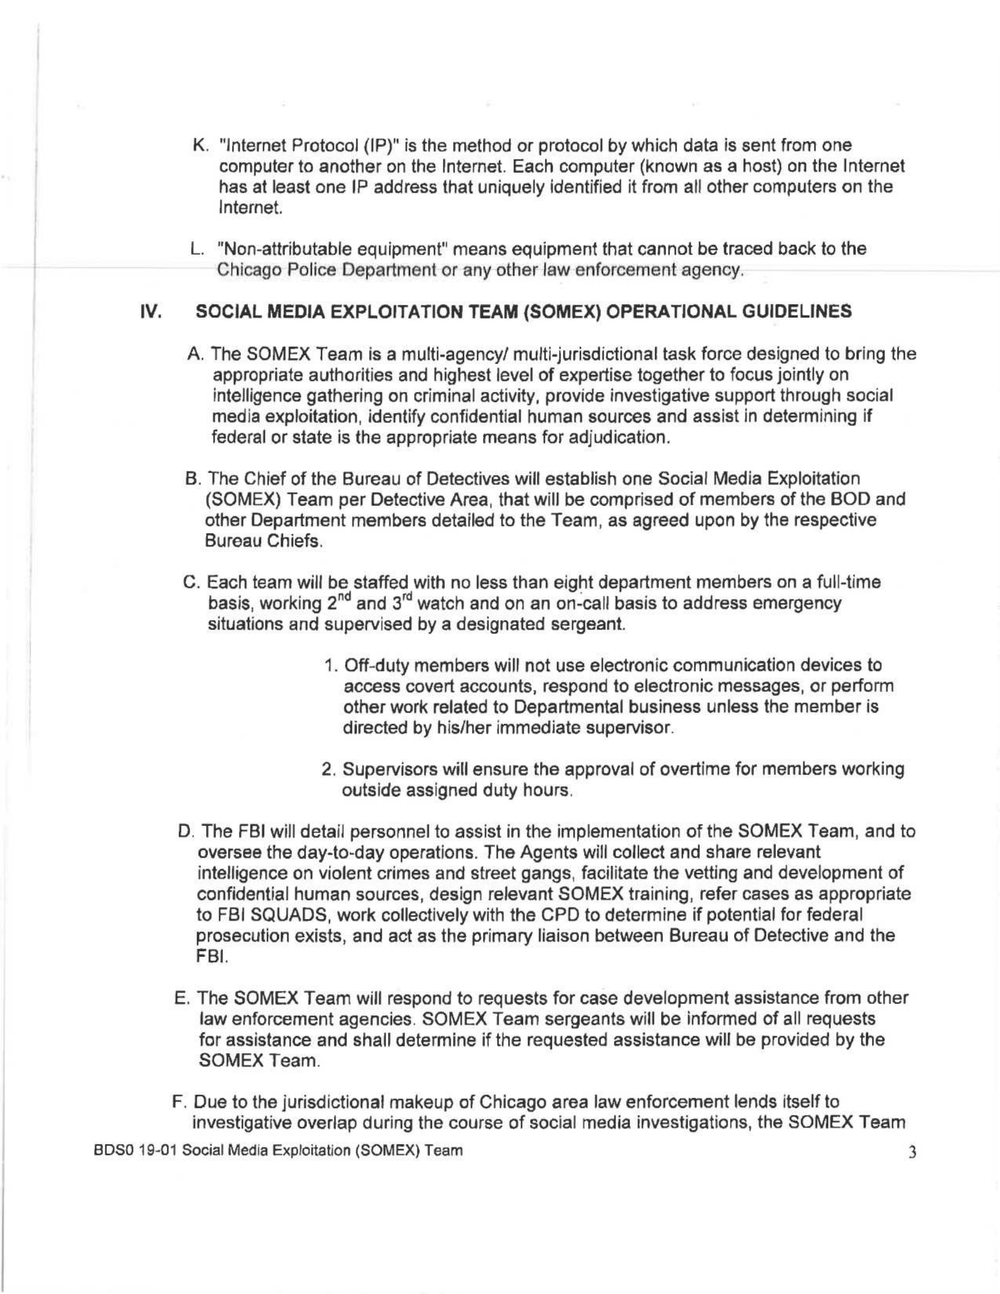 Page 3 from Chicago Police Social Media Exploitation Somex Policy